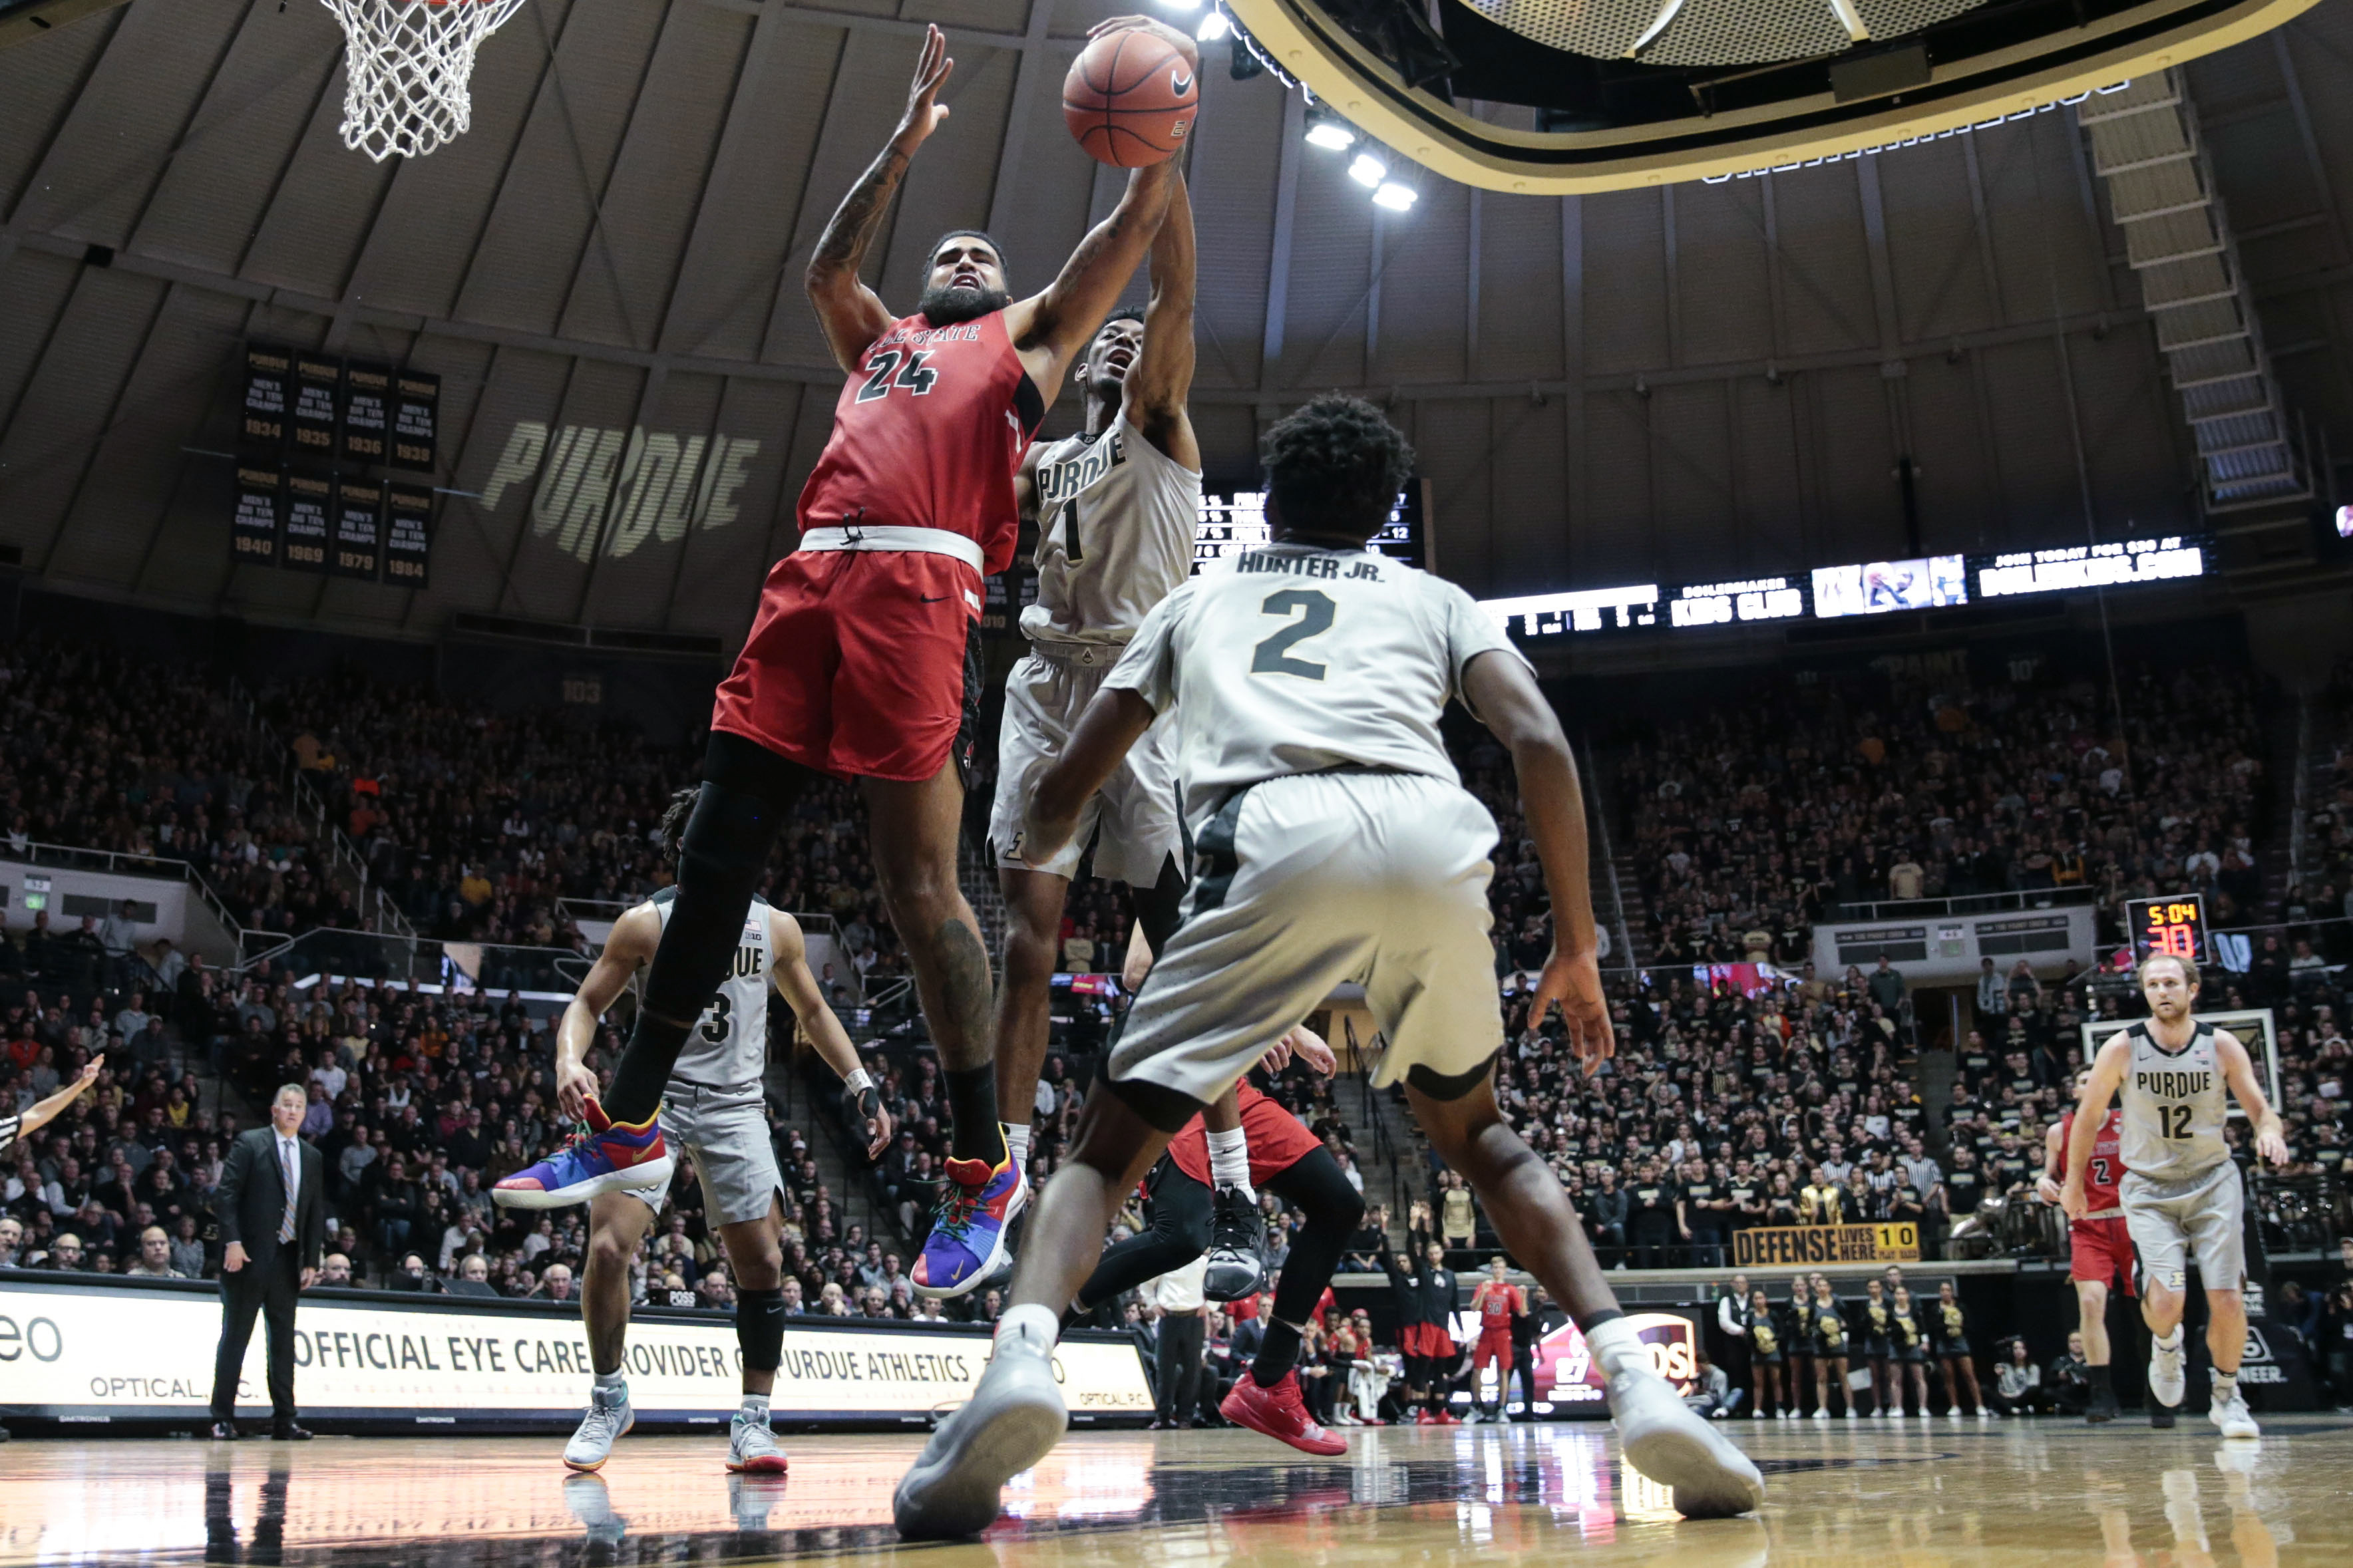 Edwards helps No. 24 Purdue hold off Ball State 84-75